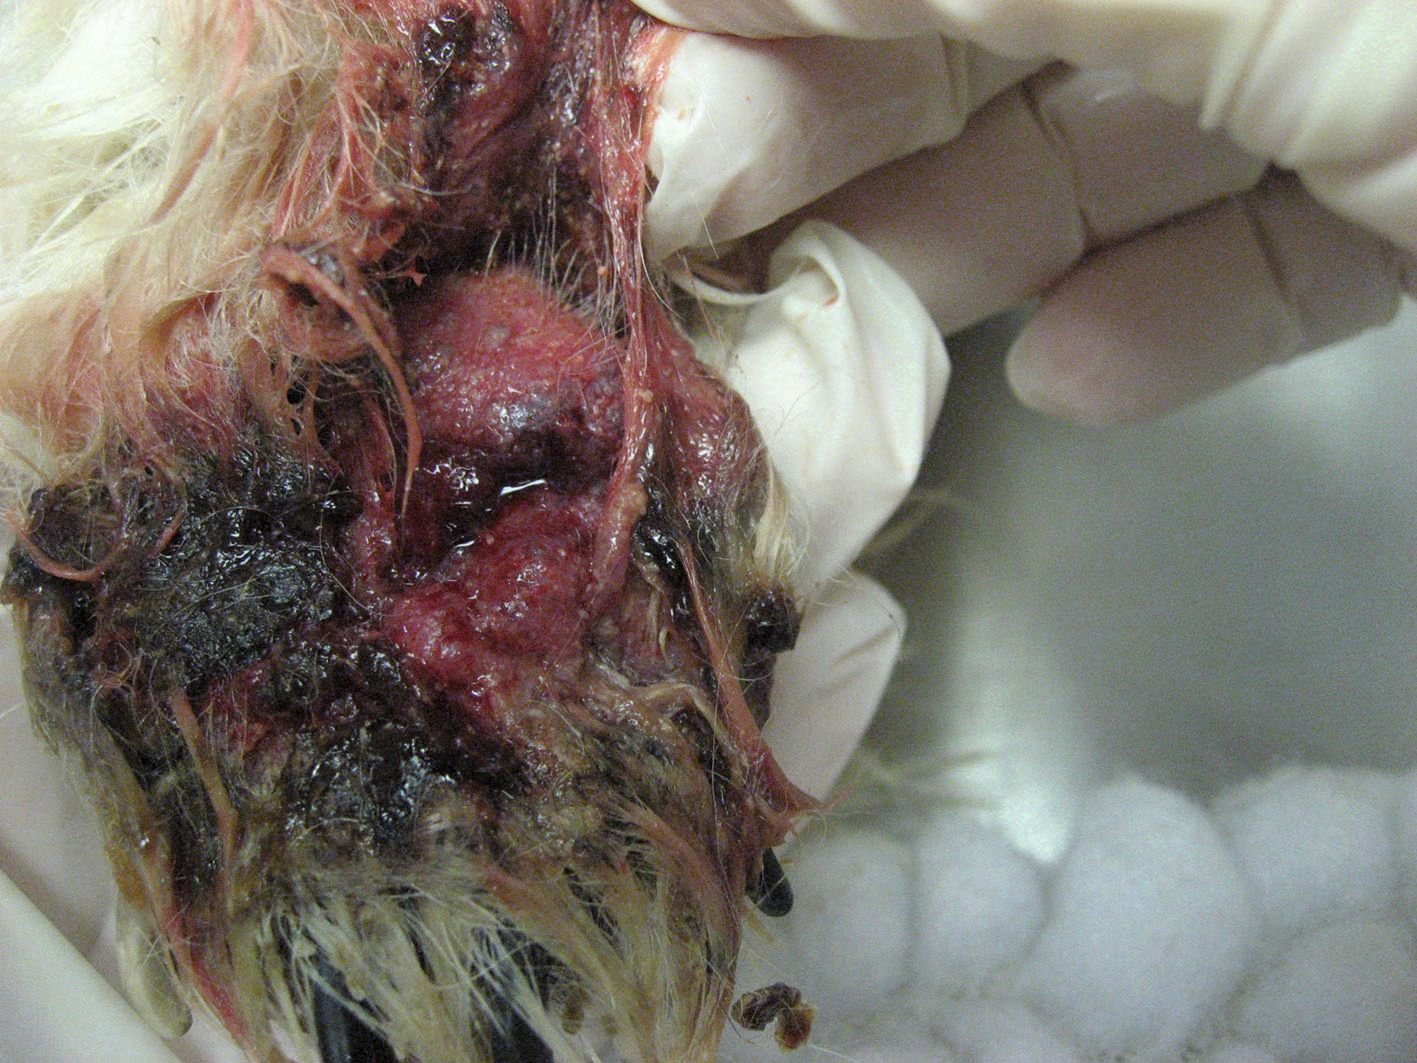 Pododemodicosis can be very uncomfortable, making deep scrapings difficult.